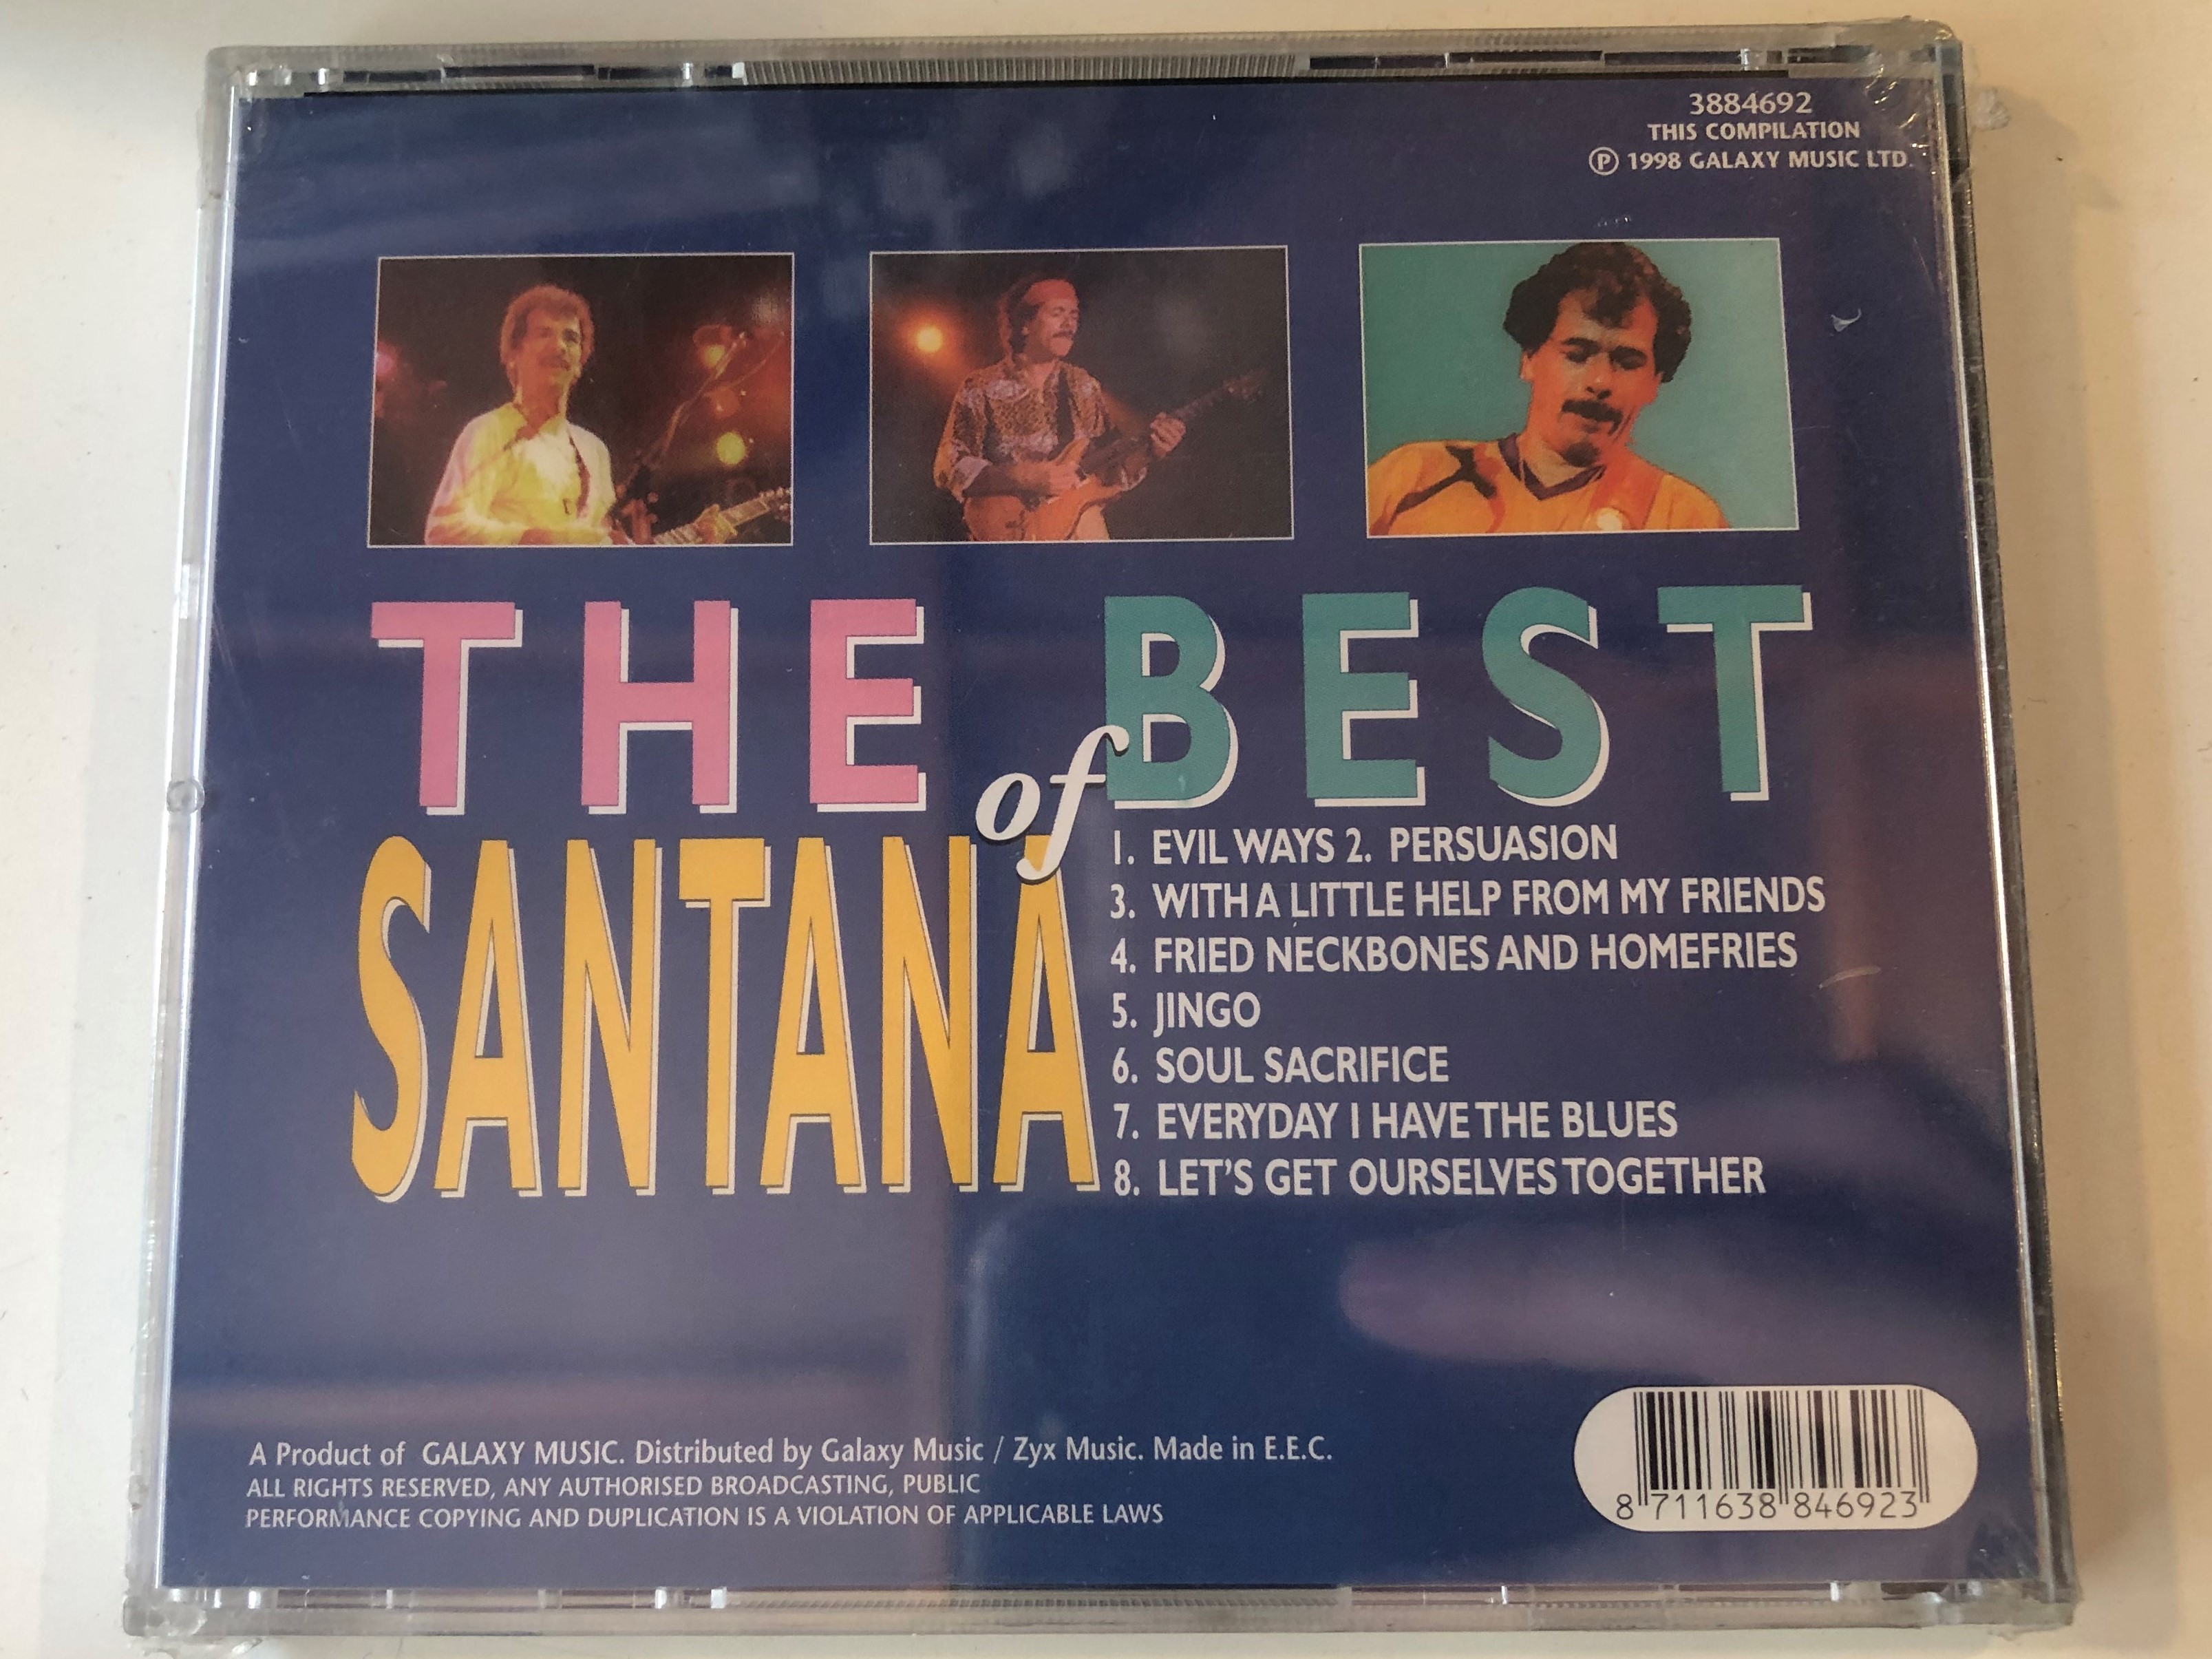 the-best-of-santana-evil-ways-persuasion-with-a-little-help-from-my-friends-let-s-get-ourselves-together-and-many-more-galaxy-music-audio-cd-1998-3884692-2-.jpg